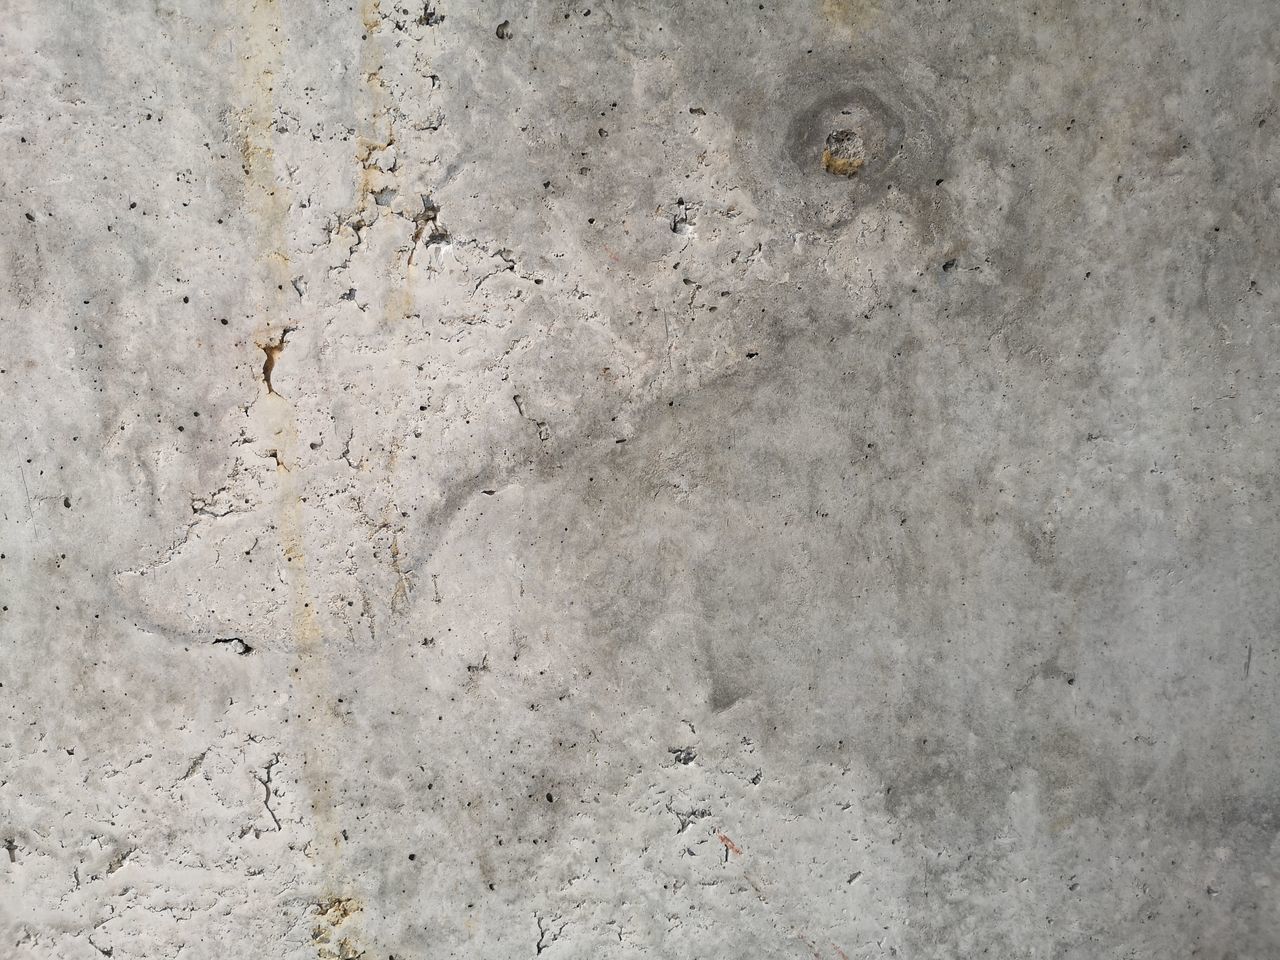 SURFACE LEVEL OF WALL